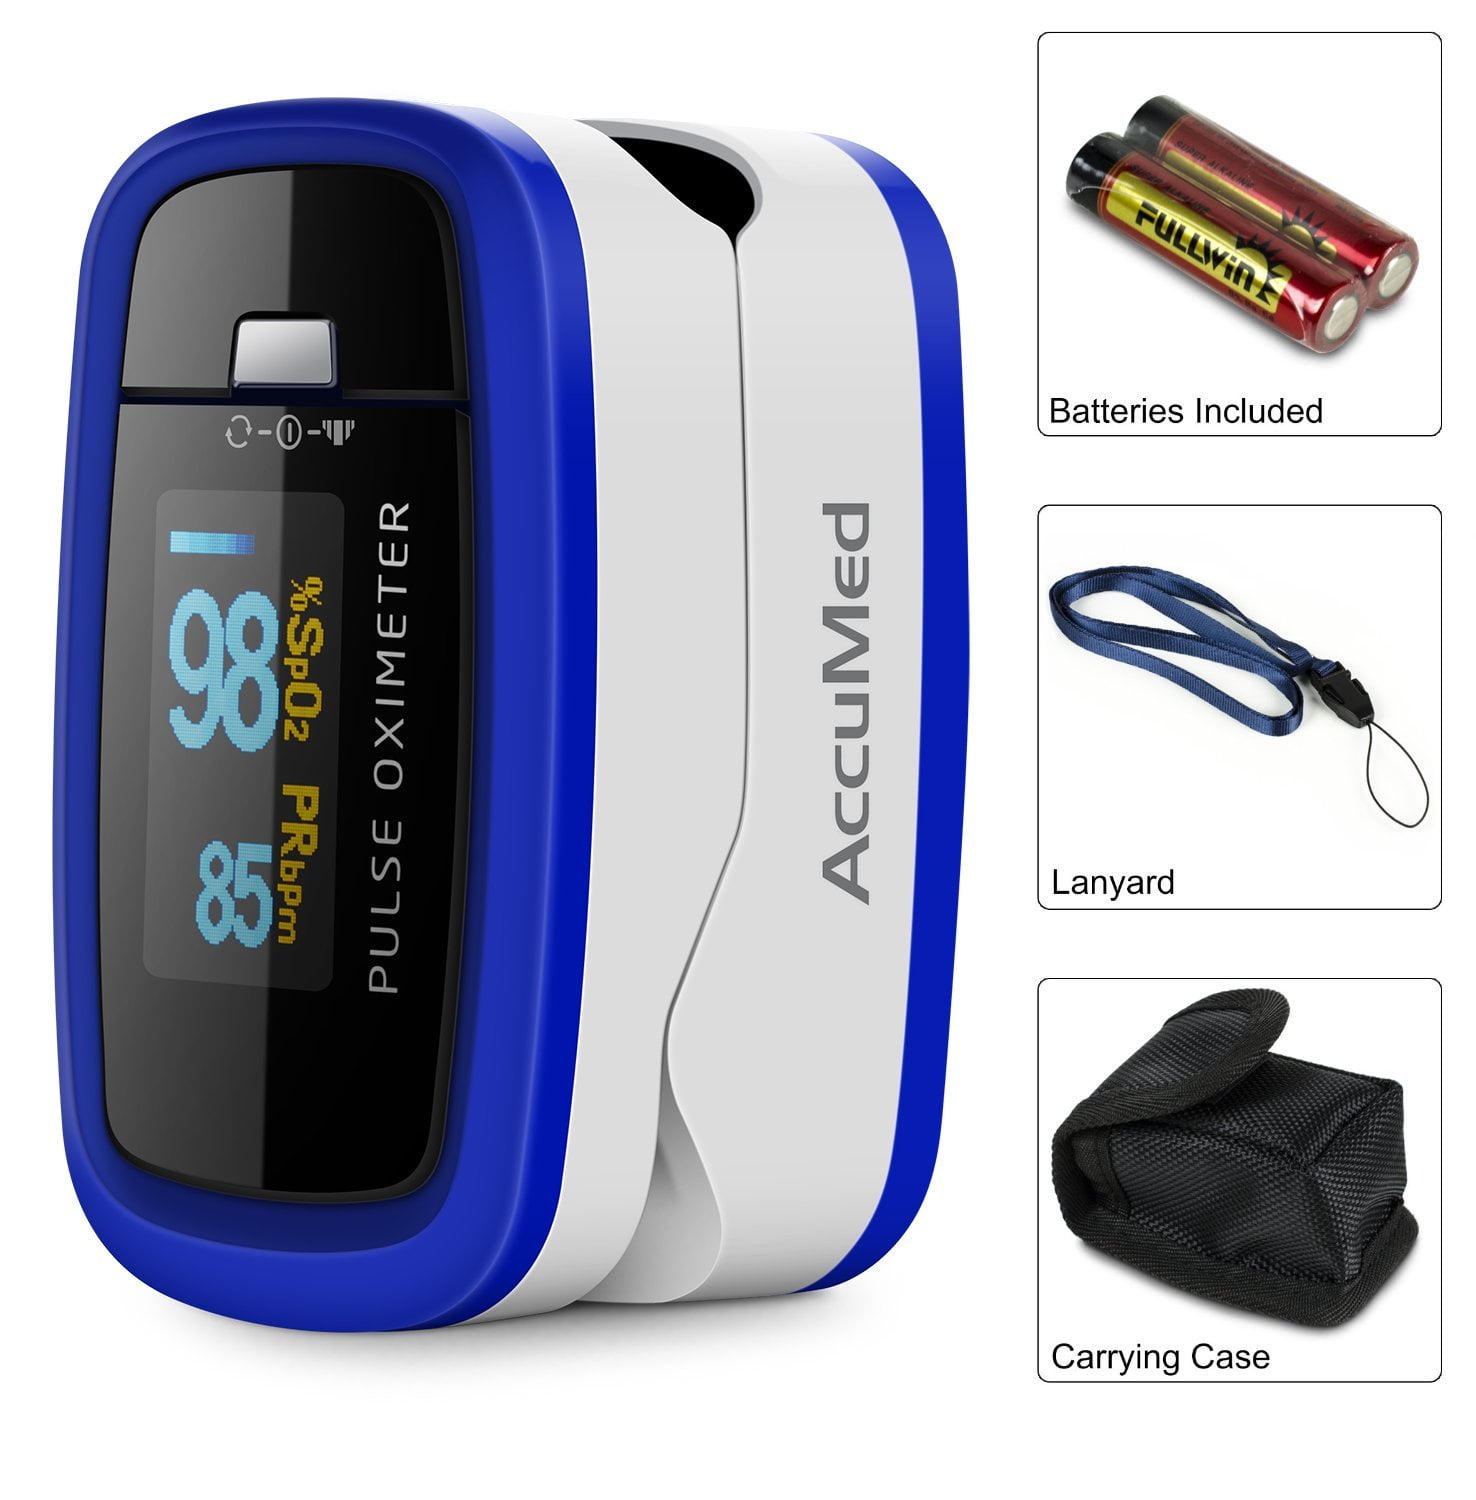 AccuMed CMS-50D1 Fingertip Pulse Oximeter Blood Oxygen Sensor SpO2 for Sports and Aviation Portable and Lightweight with LED Display Black 2 AAA Batteries Lanyard and Travel Case 